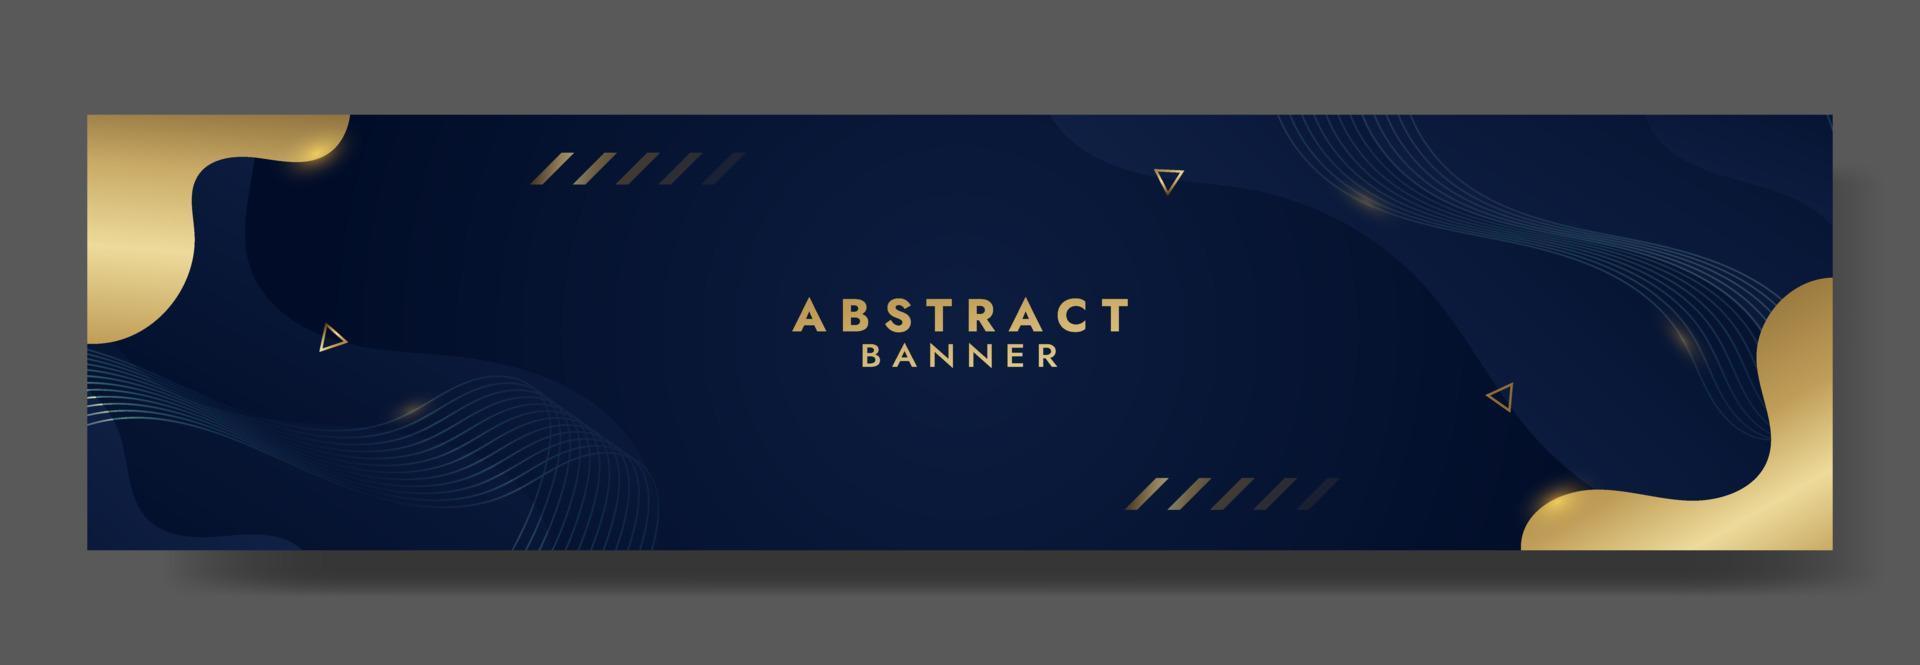 Abstract Blue Luxury Fluid Wave Banner Template vector